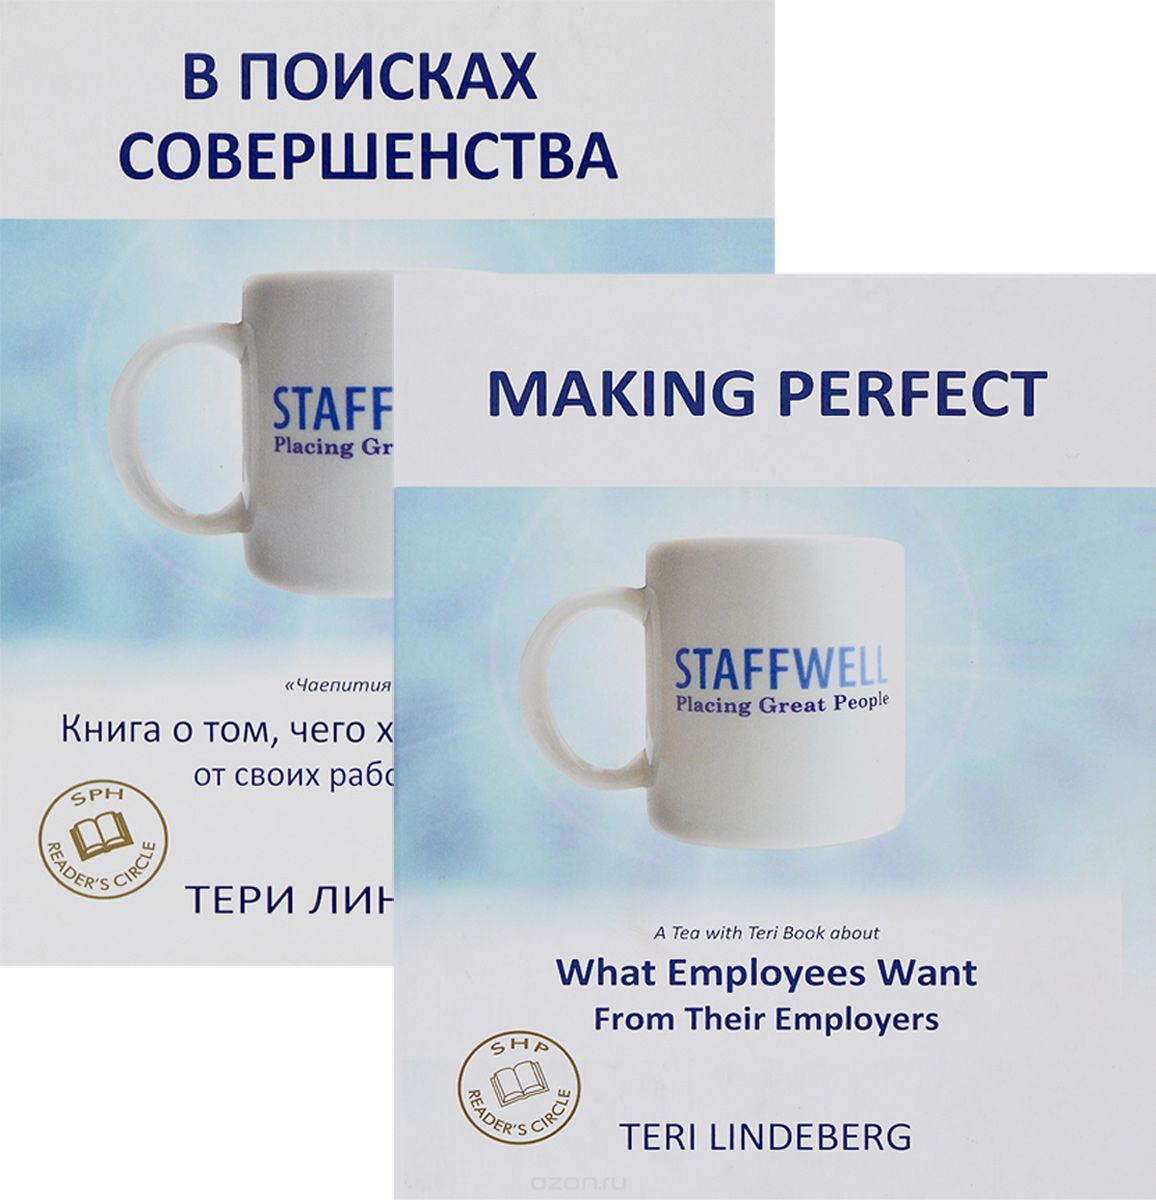   .    ,       .  Making Perfect: What Employees Want from Their Employers  (  2 ) 